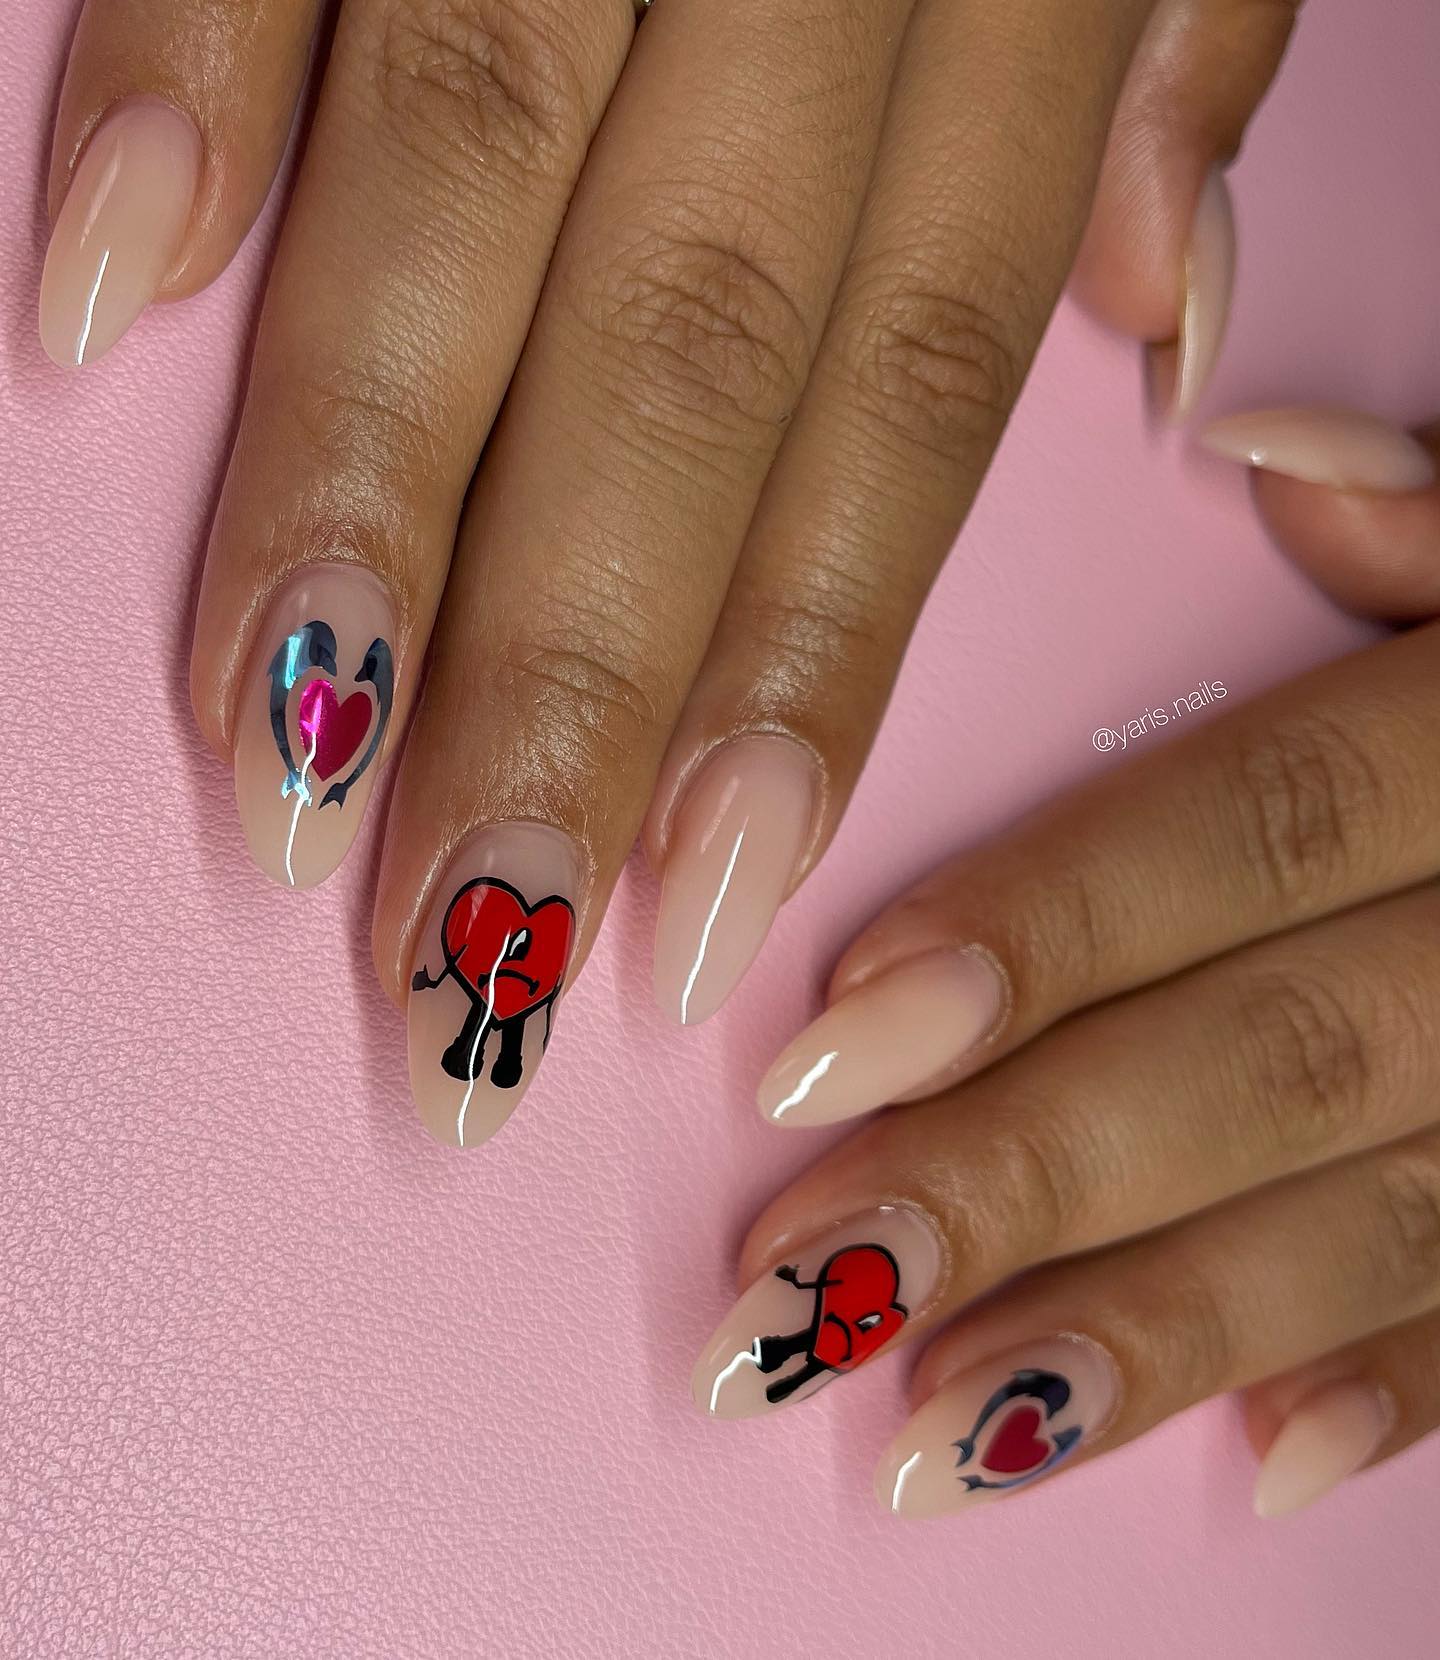  If you are bored with your simple and plain nails, you can try heart nail stickers like the ones above.